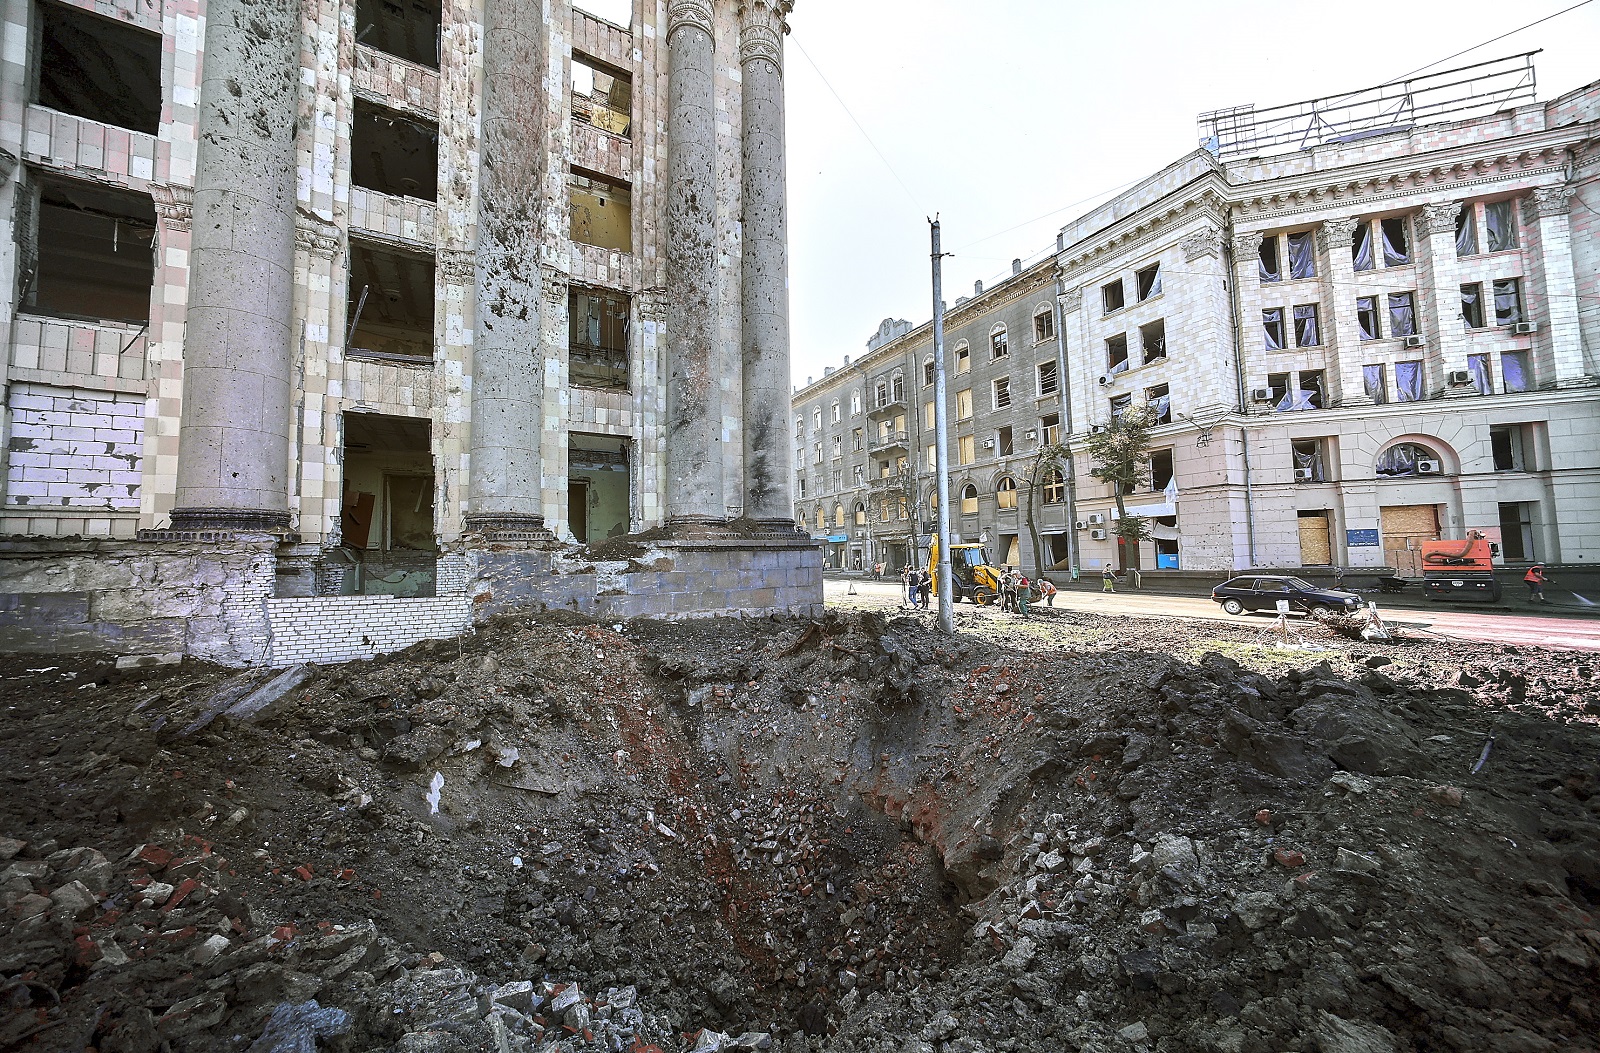 epa10145102 A shelling hole near the regional administration building after the rocket hit on a central square downtown Kharkiv, Ukraine, 29 August 2022 amid Russia's military invasion. Kharkiv and surrounding areas have been the target of heavy shelling since February 2022, when Russian troops entered Ukraine starting a conflict that has provoked destruction and a humanitarian crisis.  EPA/SERGEY KOZLOV